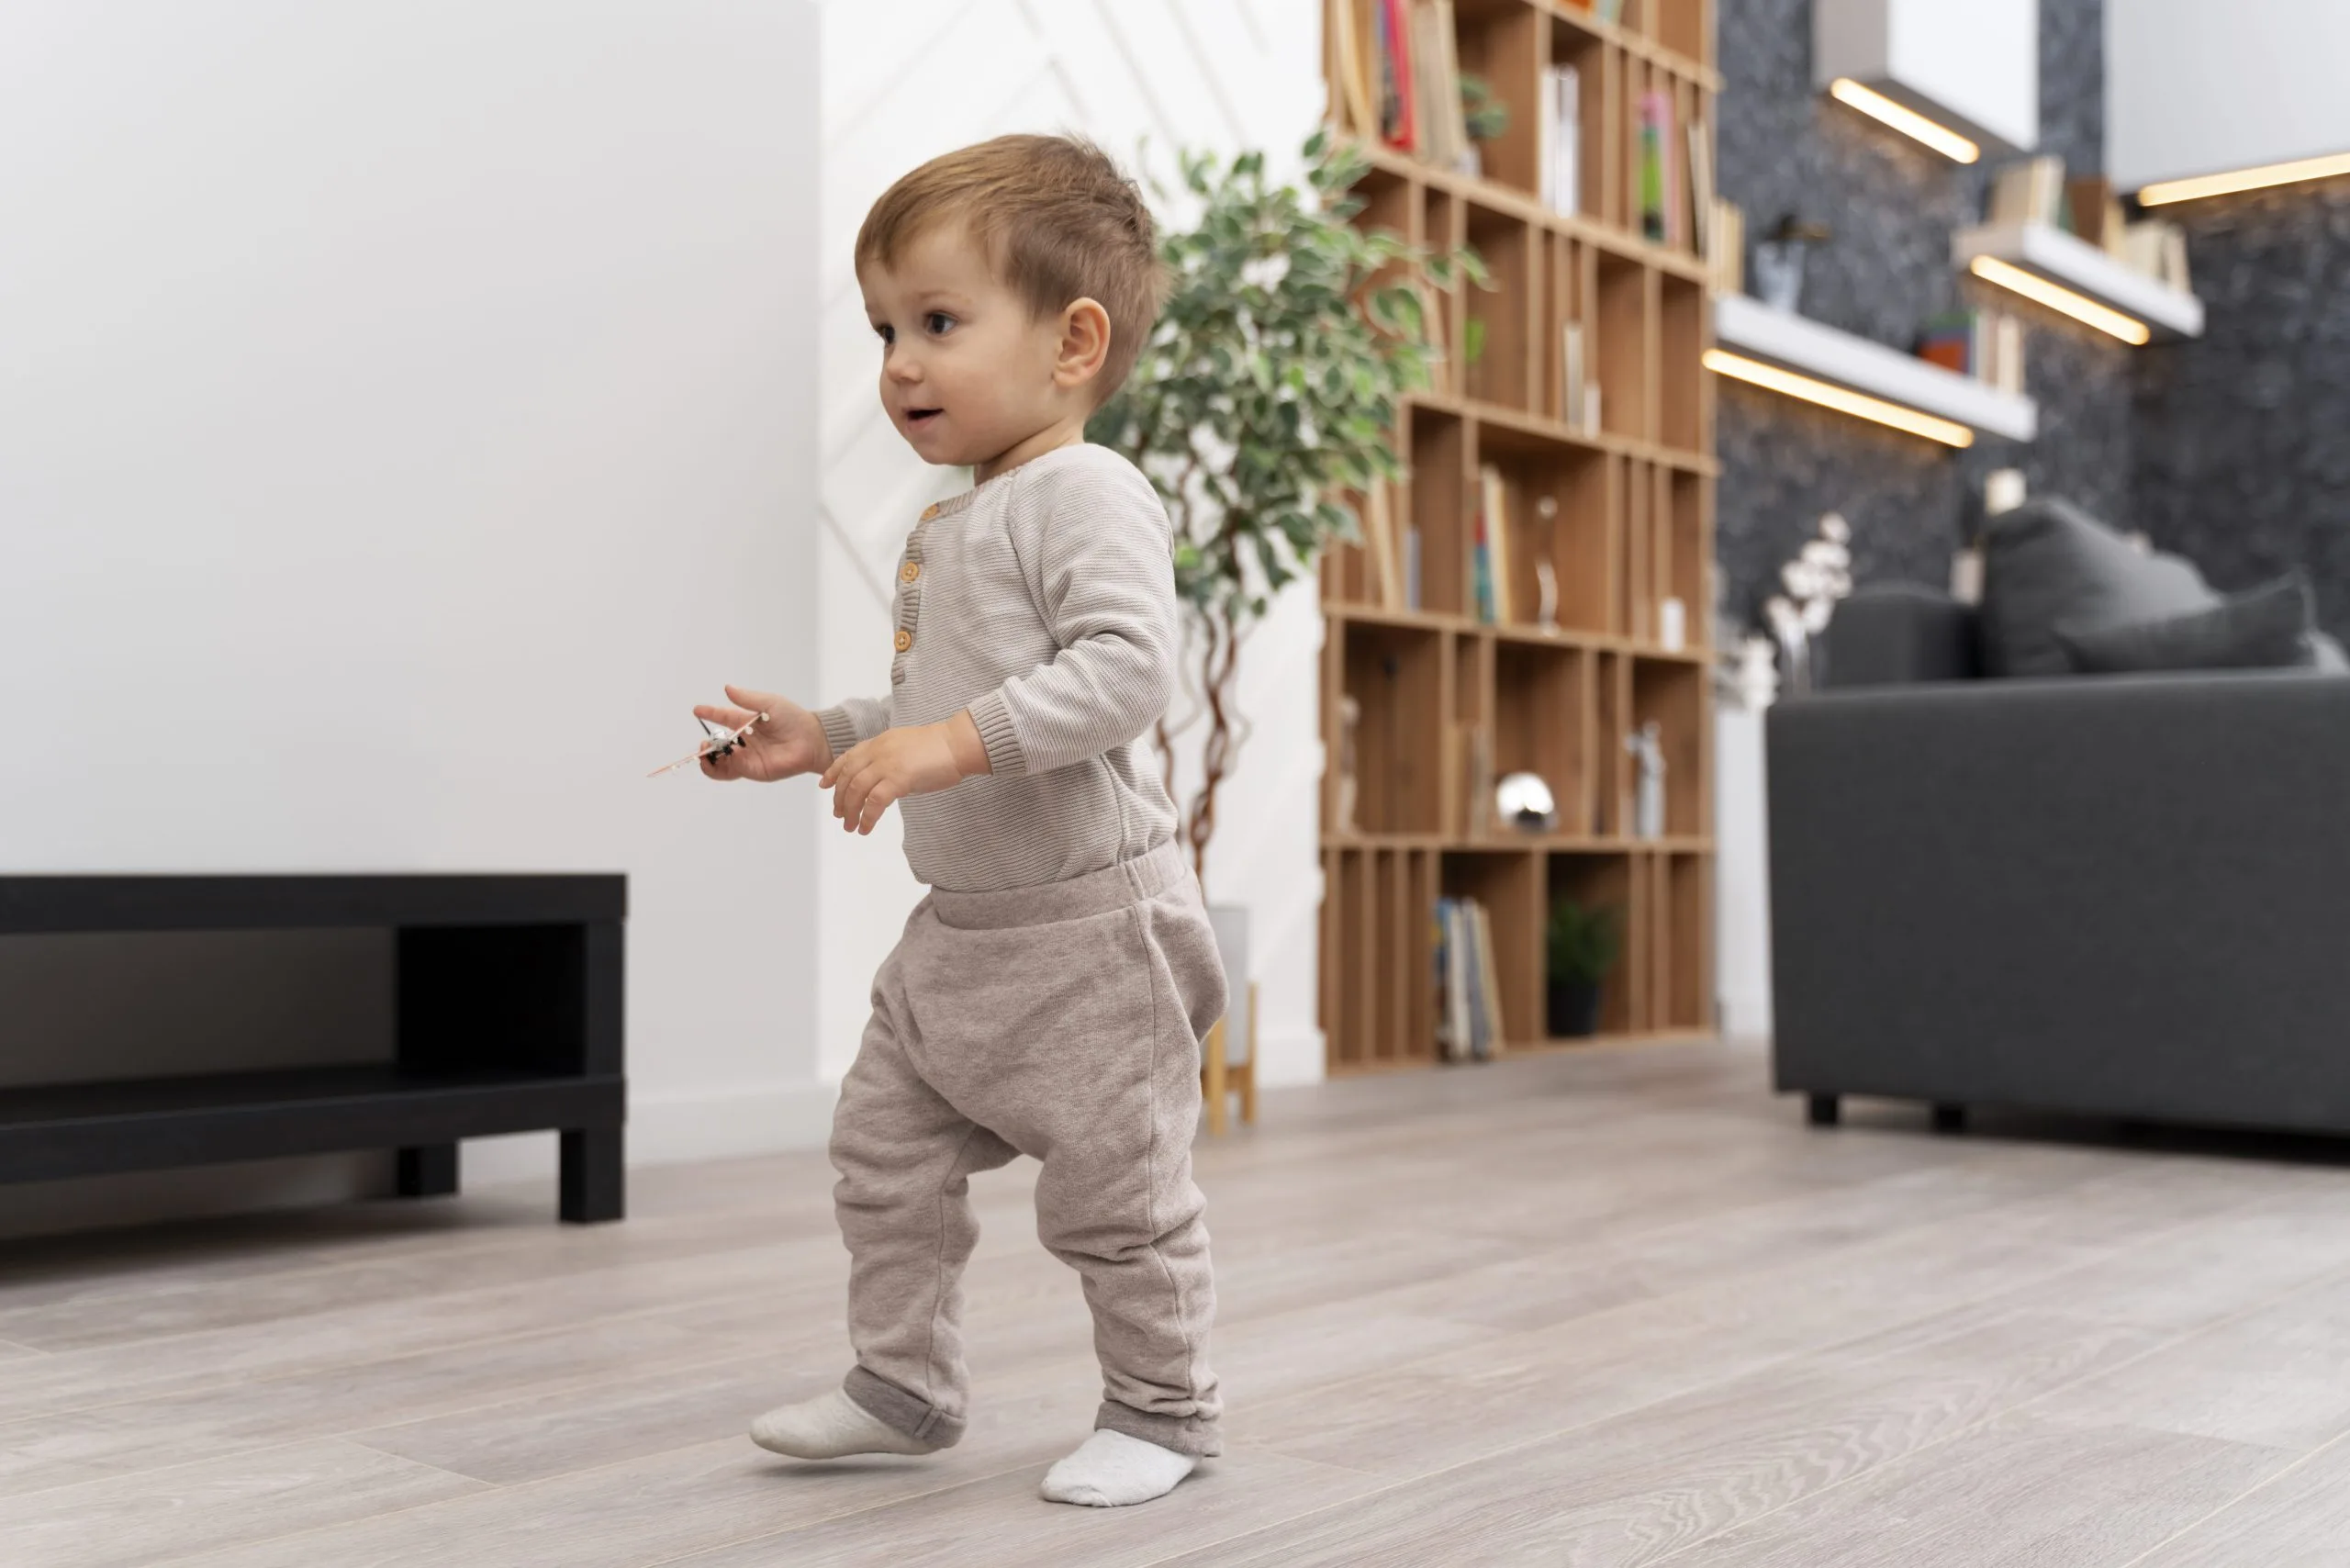 A toddler taking their first steps indoors.
